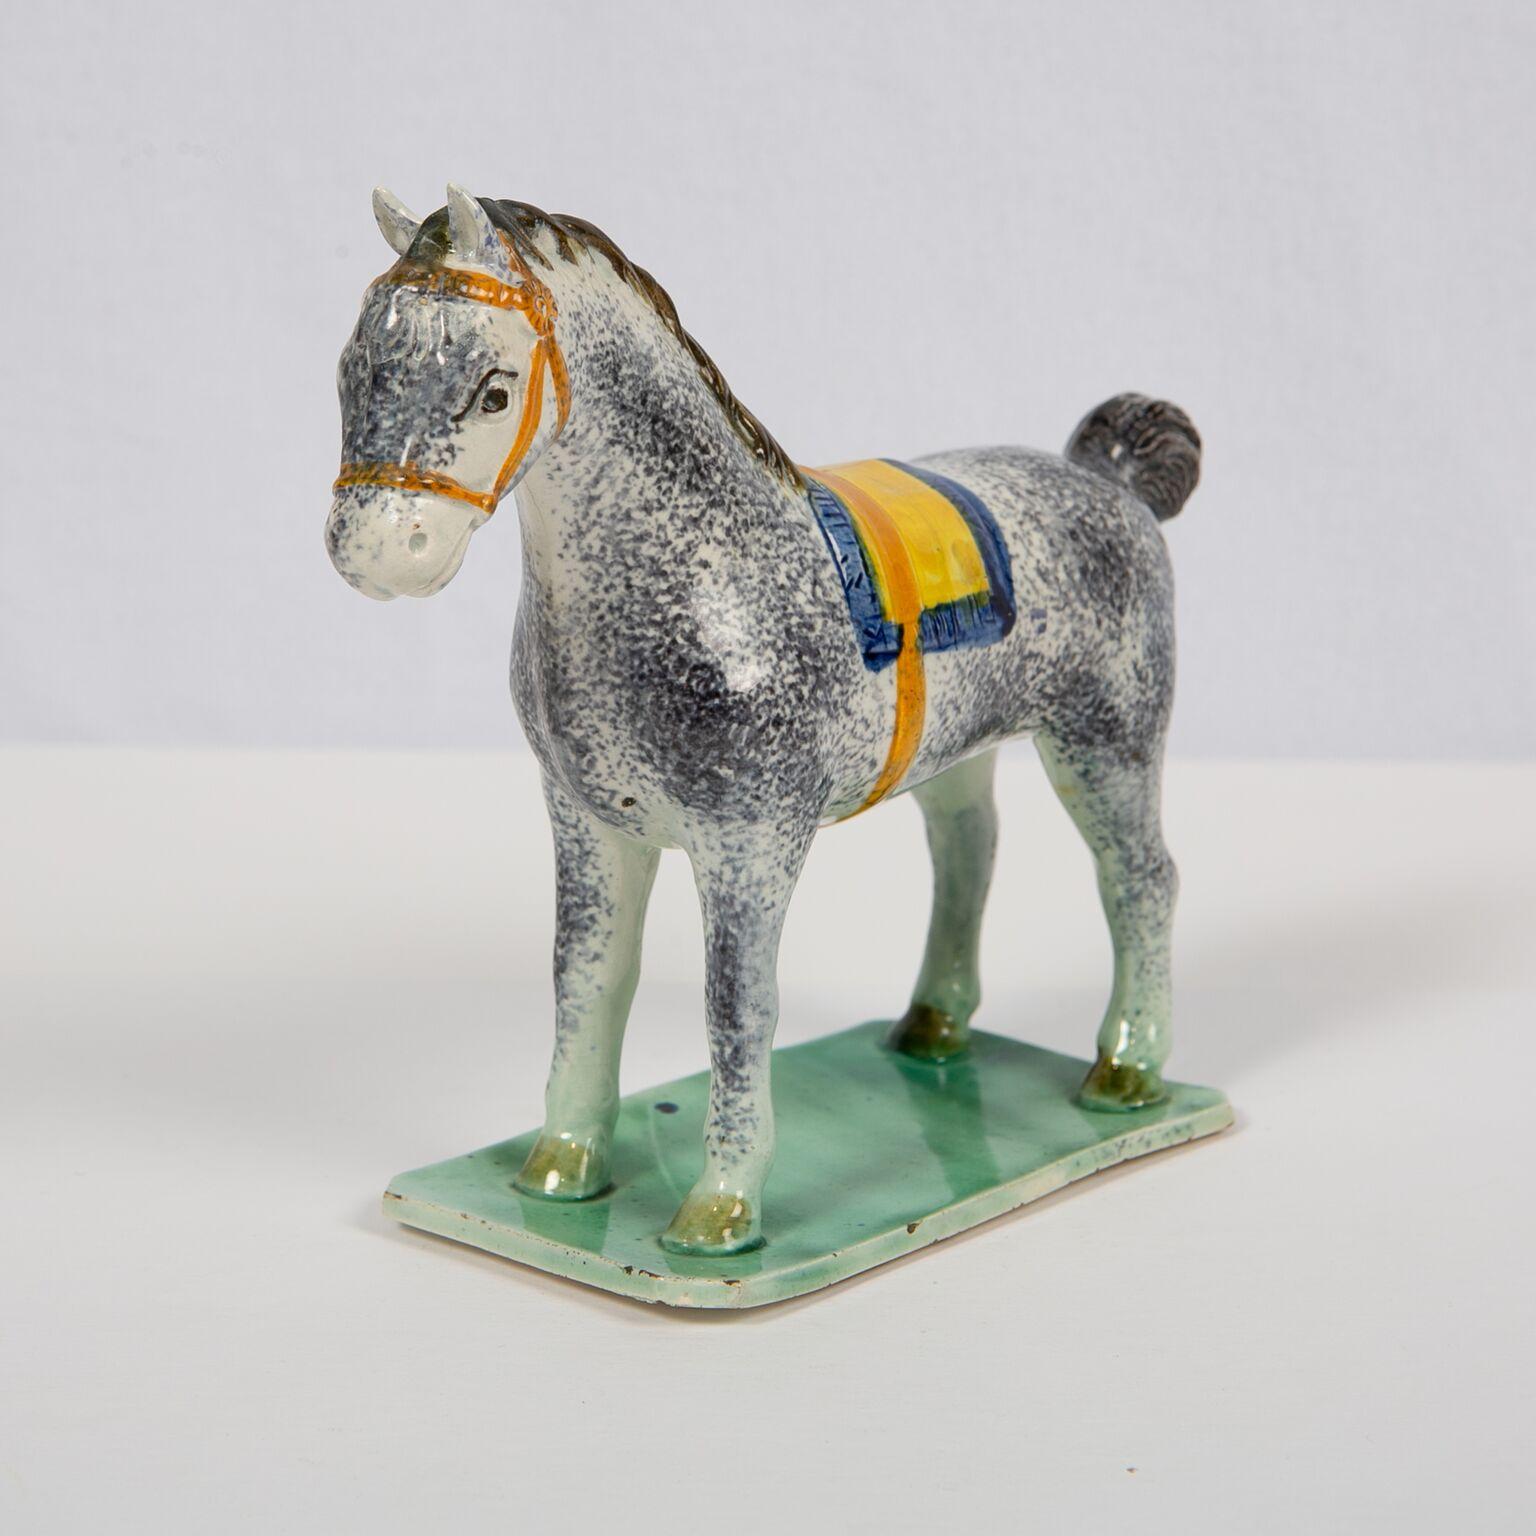 English Antique Pottery Horse Made in England at St. Anthony's Pottery, circa 1800-1810